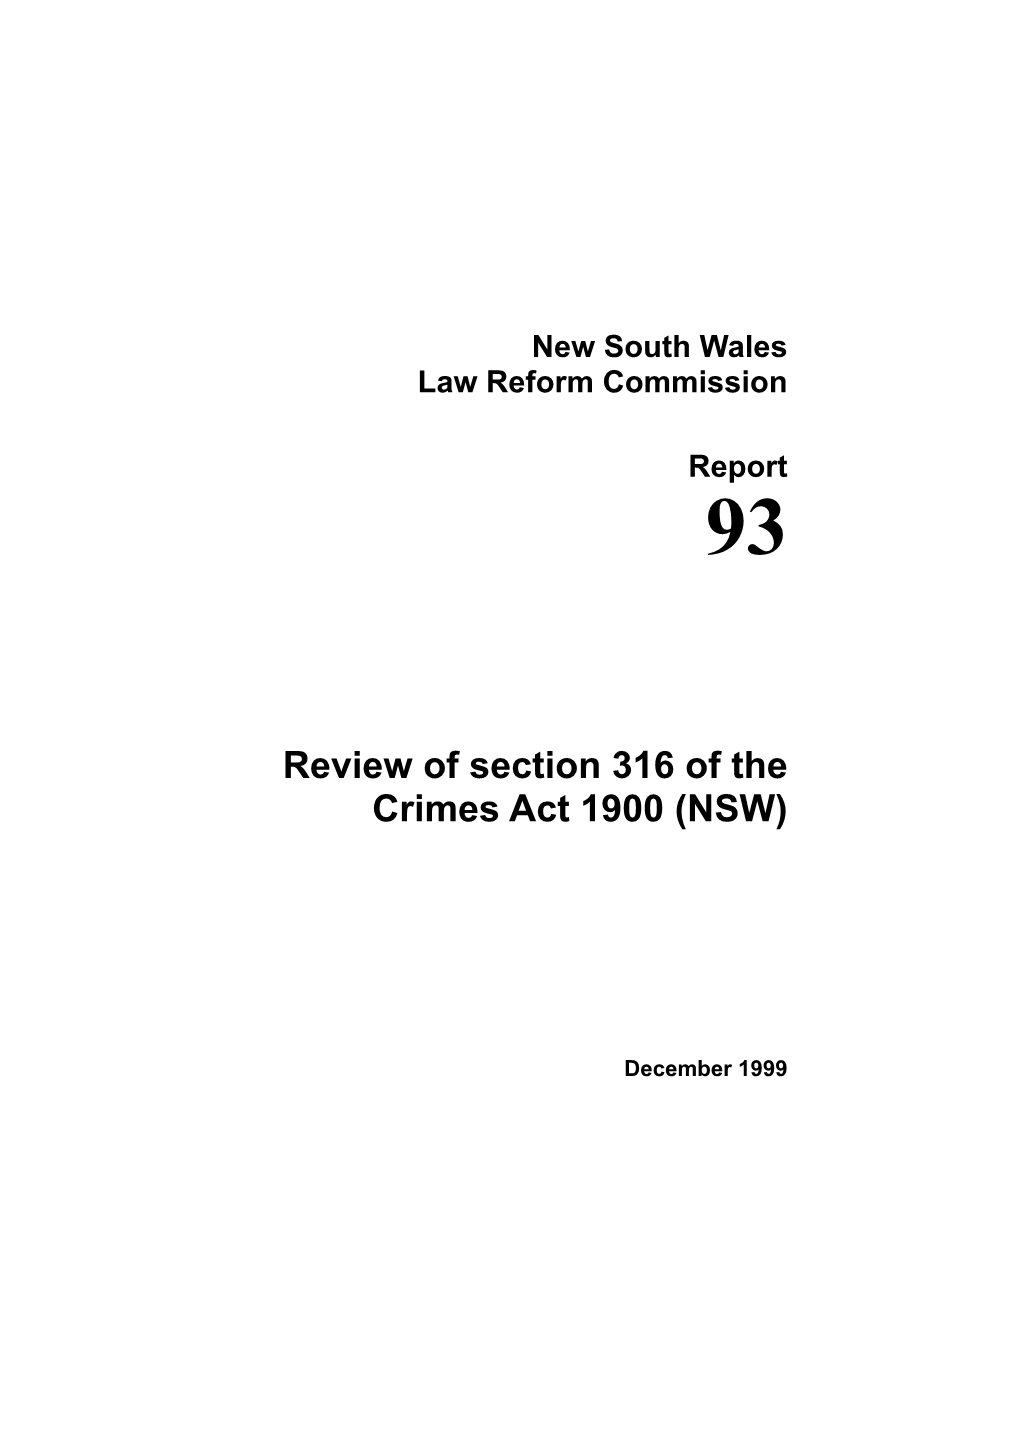 Report 93: Review of Section 316 of the Crimes Act 1900 (NSW)